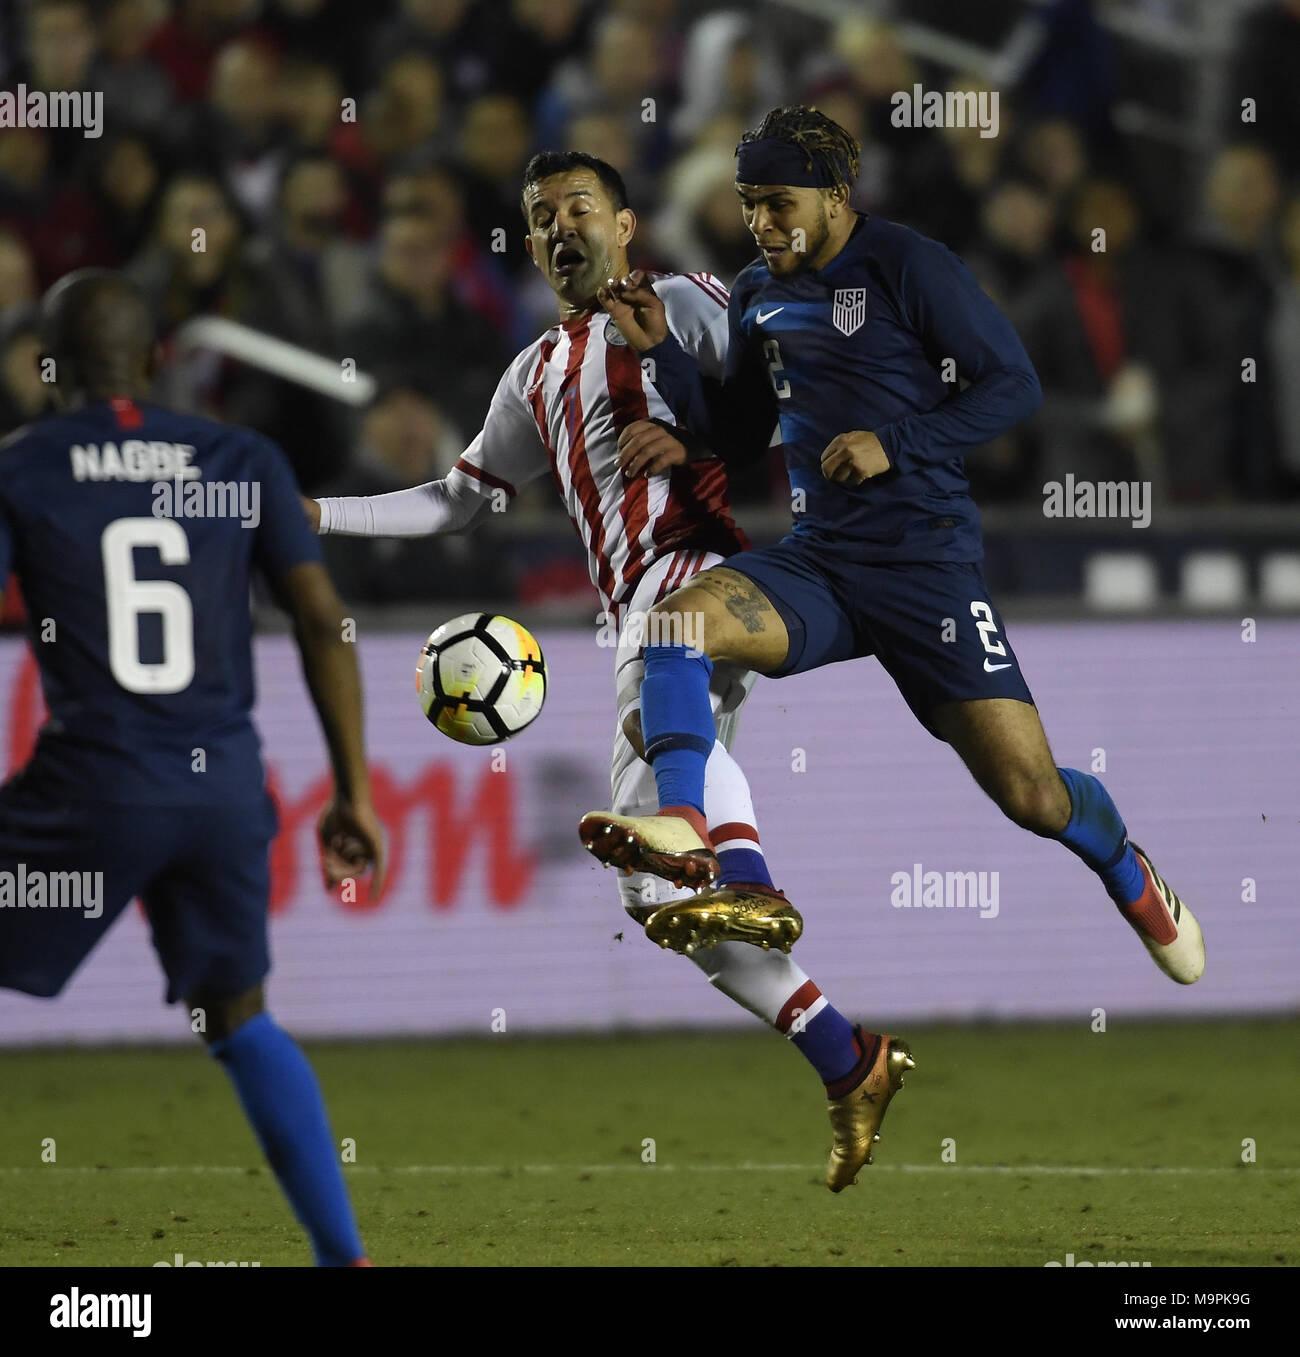 Cary, North Carolina, USA. 27th Mar, 2018. DEANDRE YEDLIN (2) of USA wins a ball against NESTOR CAMACHO, center, of Paraguay. The USA played Paraguay in a men soccer game that took place at the WakeMed Soccer Park in Cary, N.C. on Tuesday, March 27, 2018. USA won 1-0. Credit: Fabian Radulescu/ZUMA Wire/Alamy Live News Stock Photo